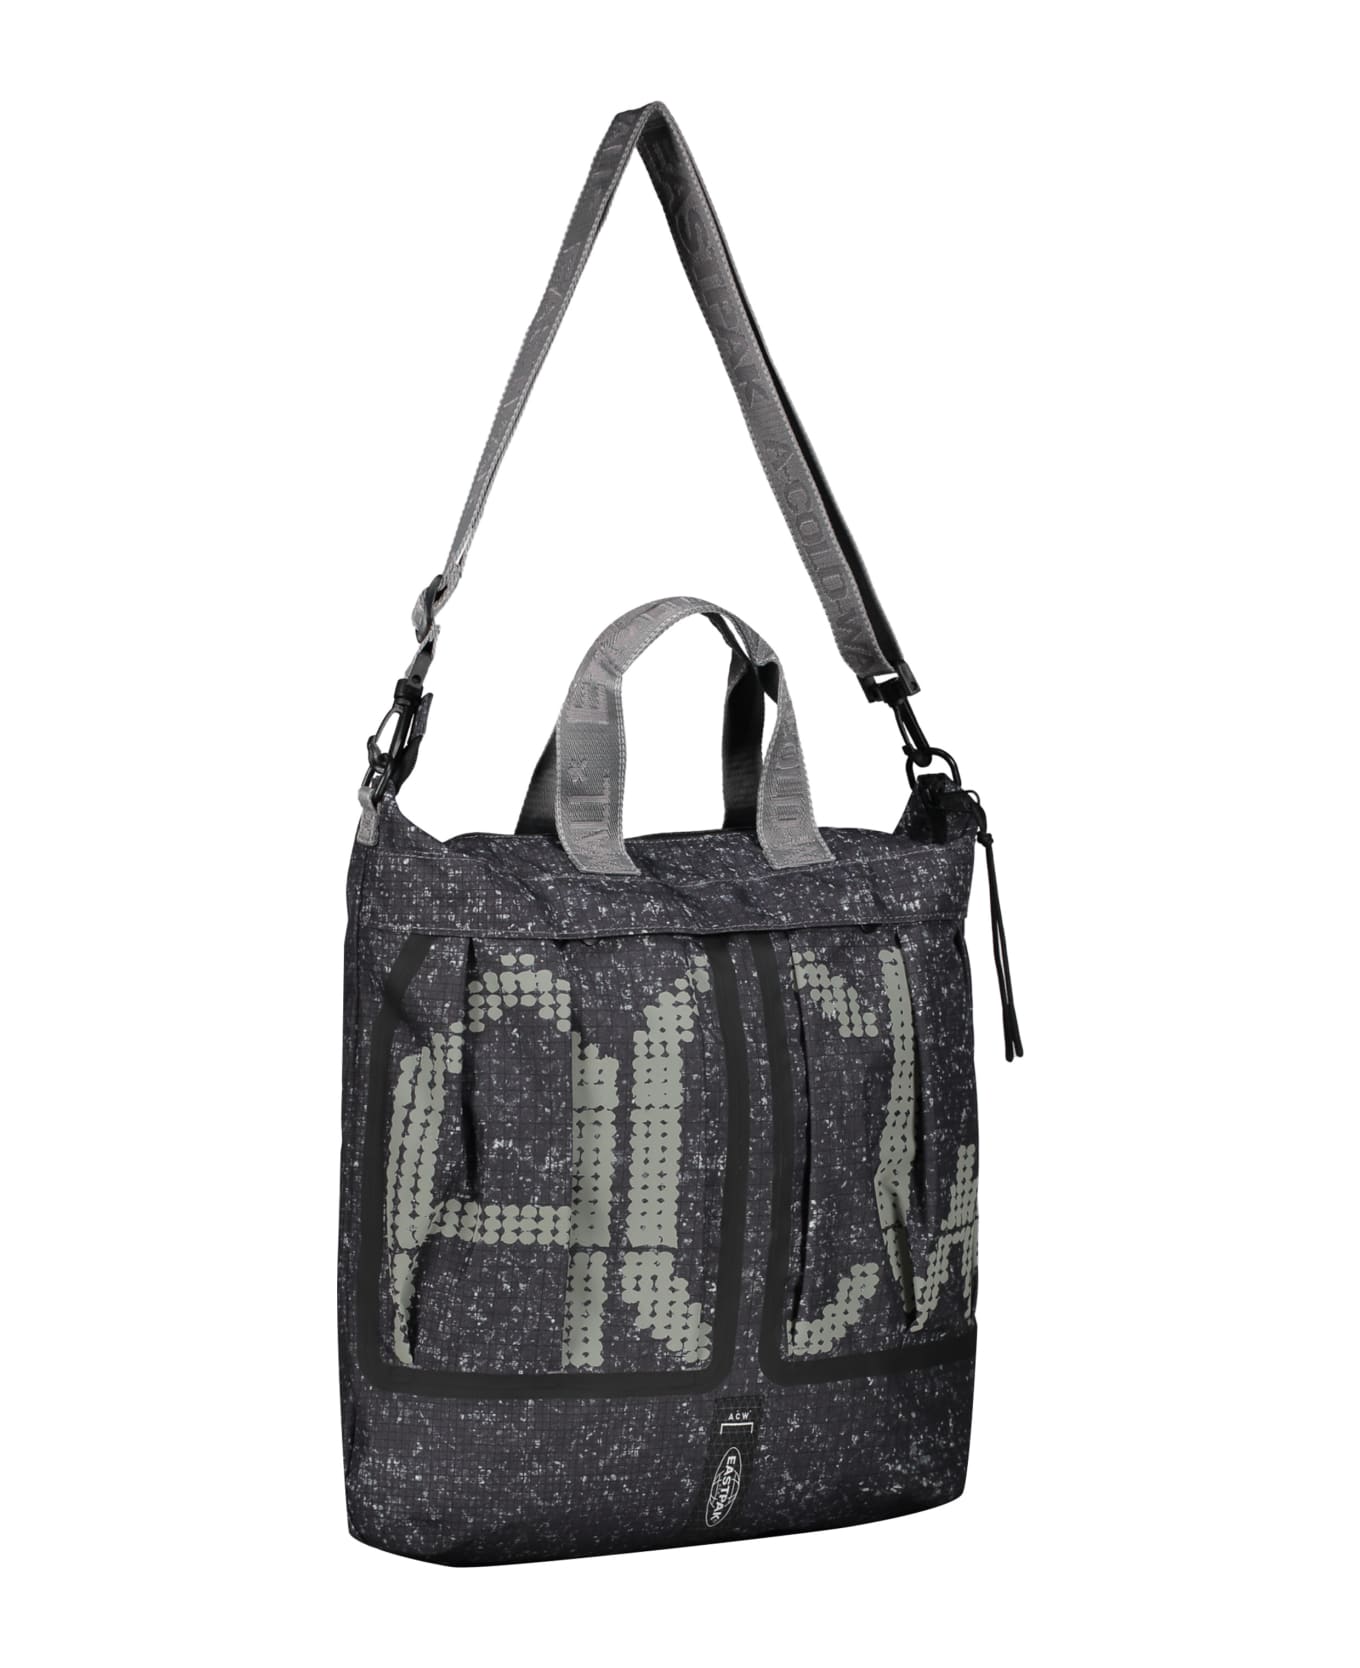 A-COLD-WALL Printed Tote Bag - blue